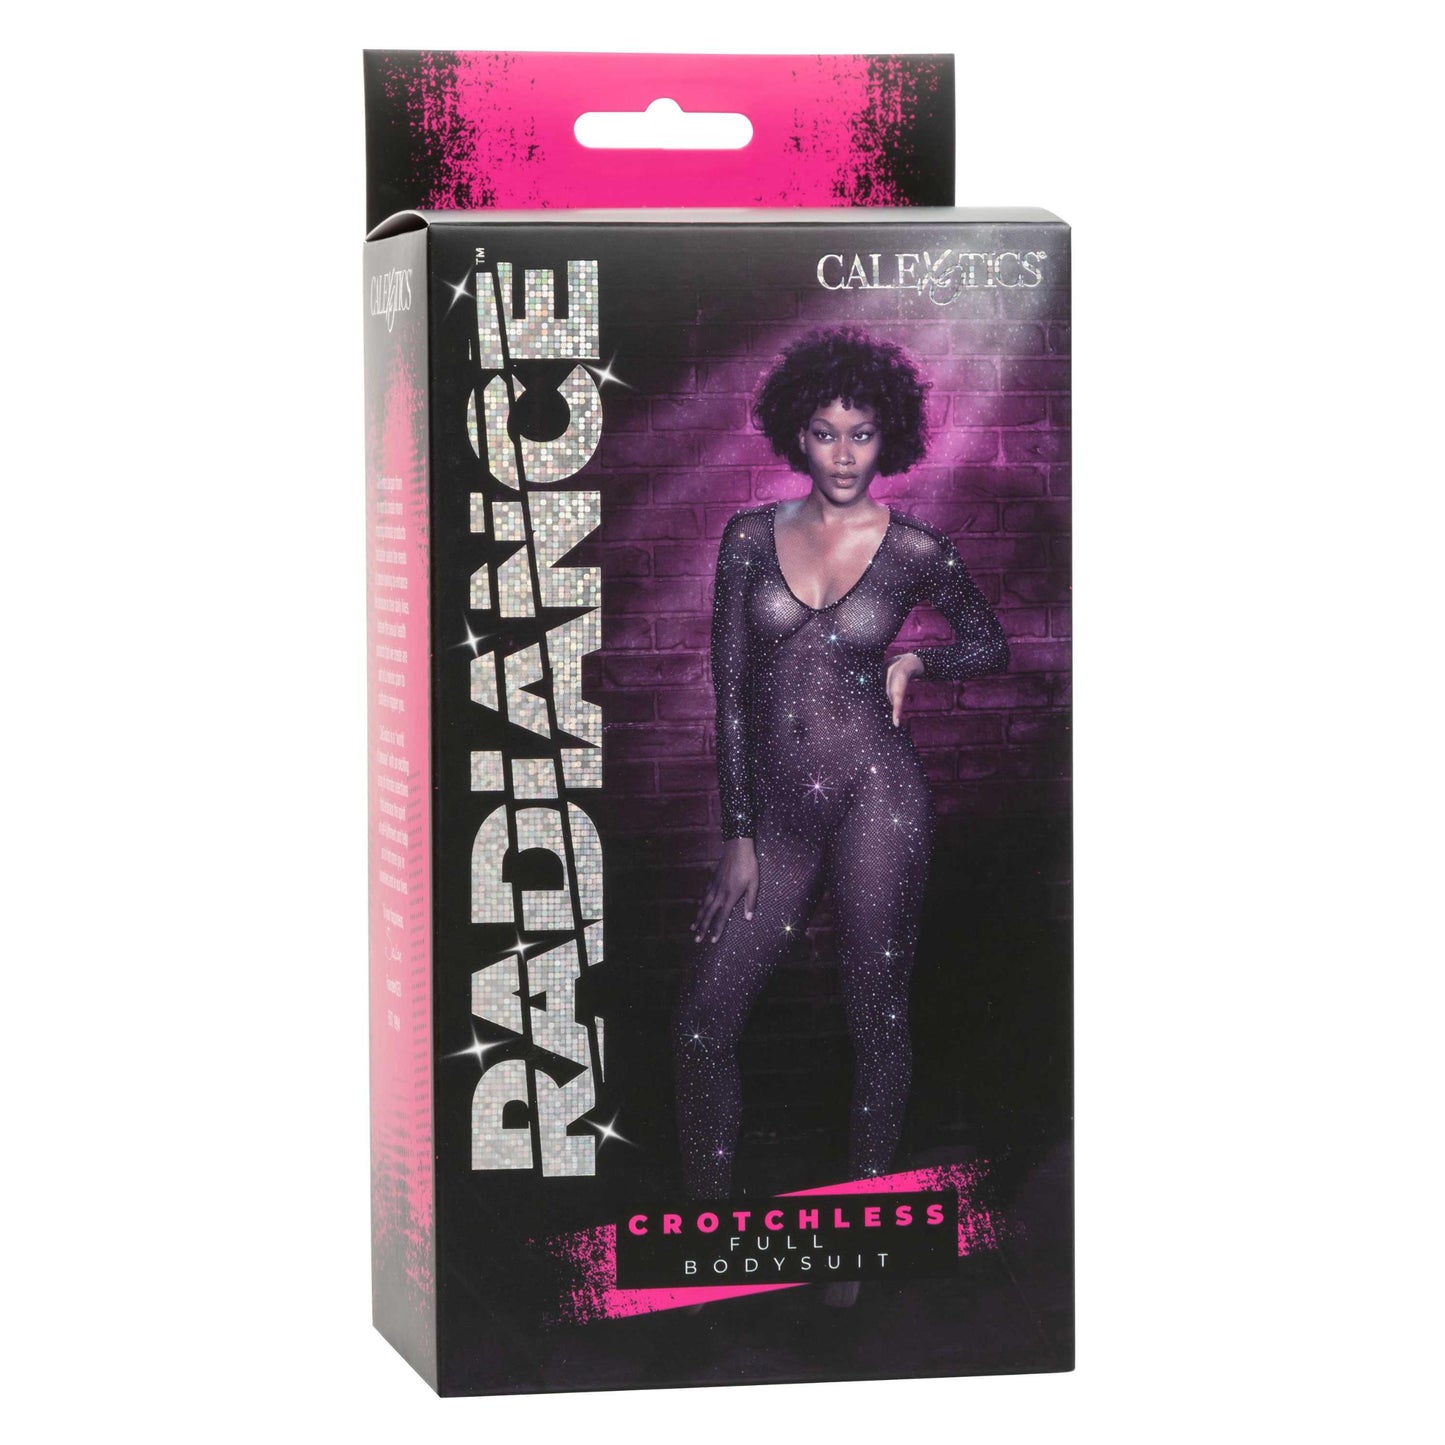 Radiance Crotchless Full Body Suit - - Black